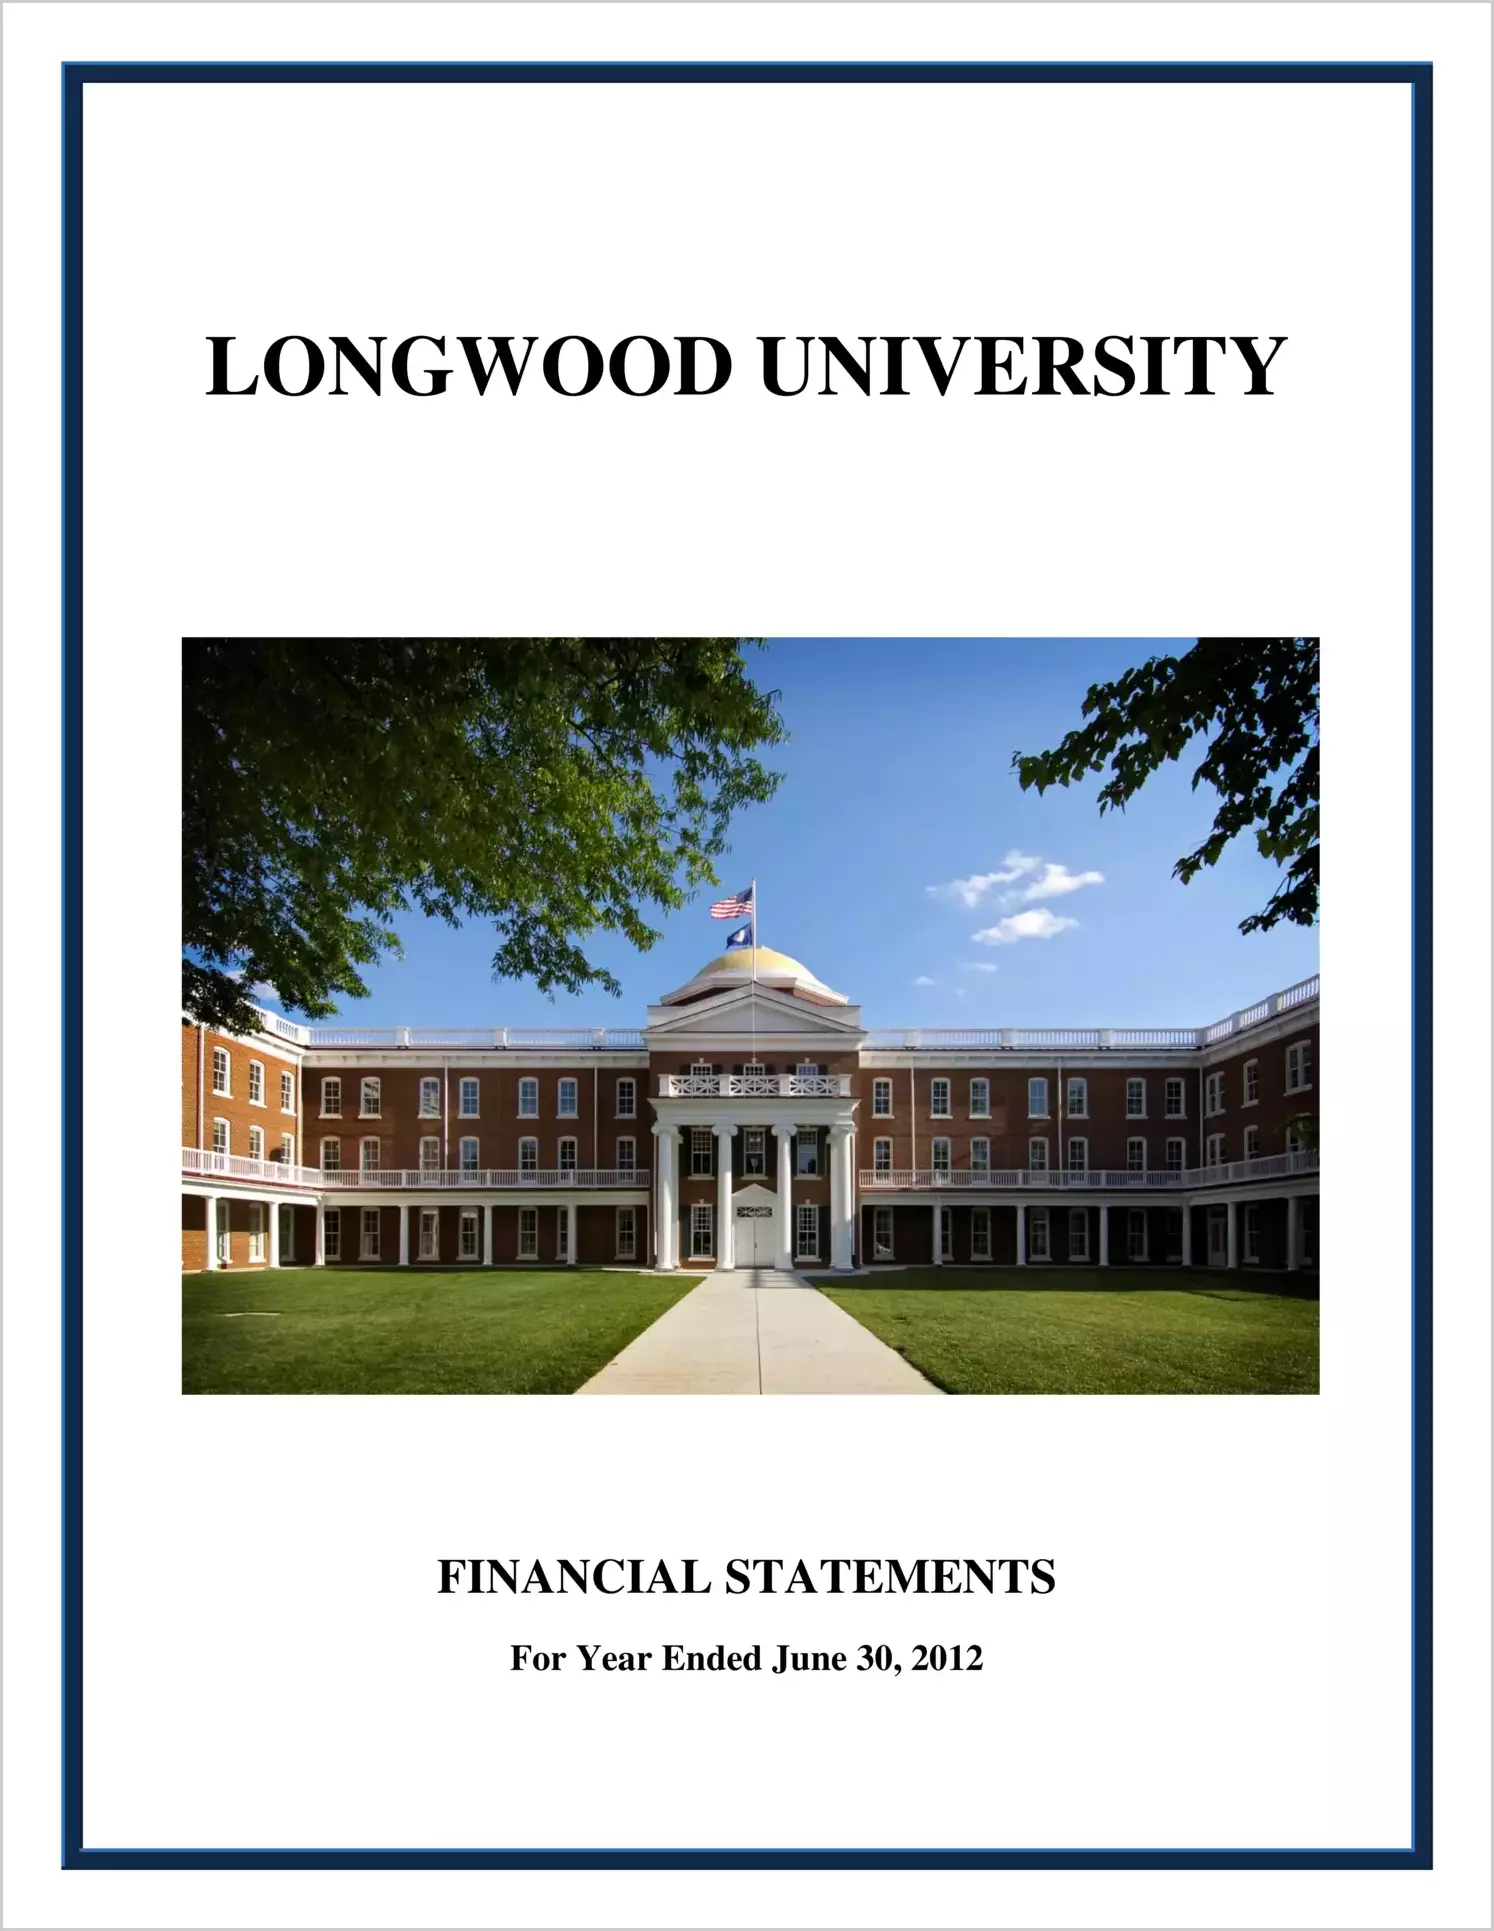 Longwood University Financial Statement report for the year ended June 30, 2012